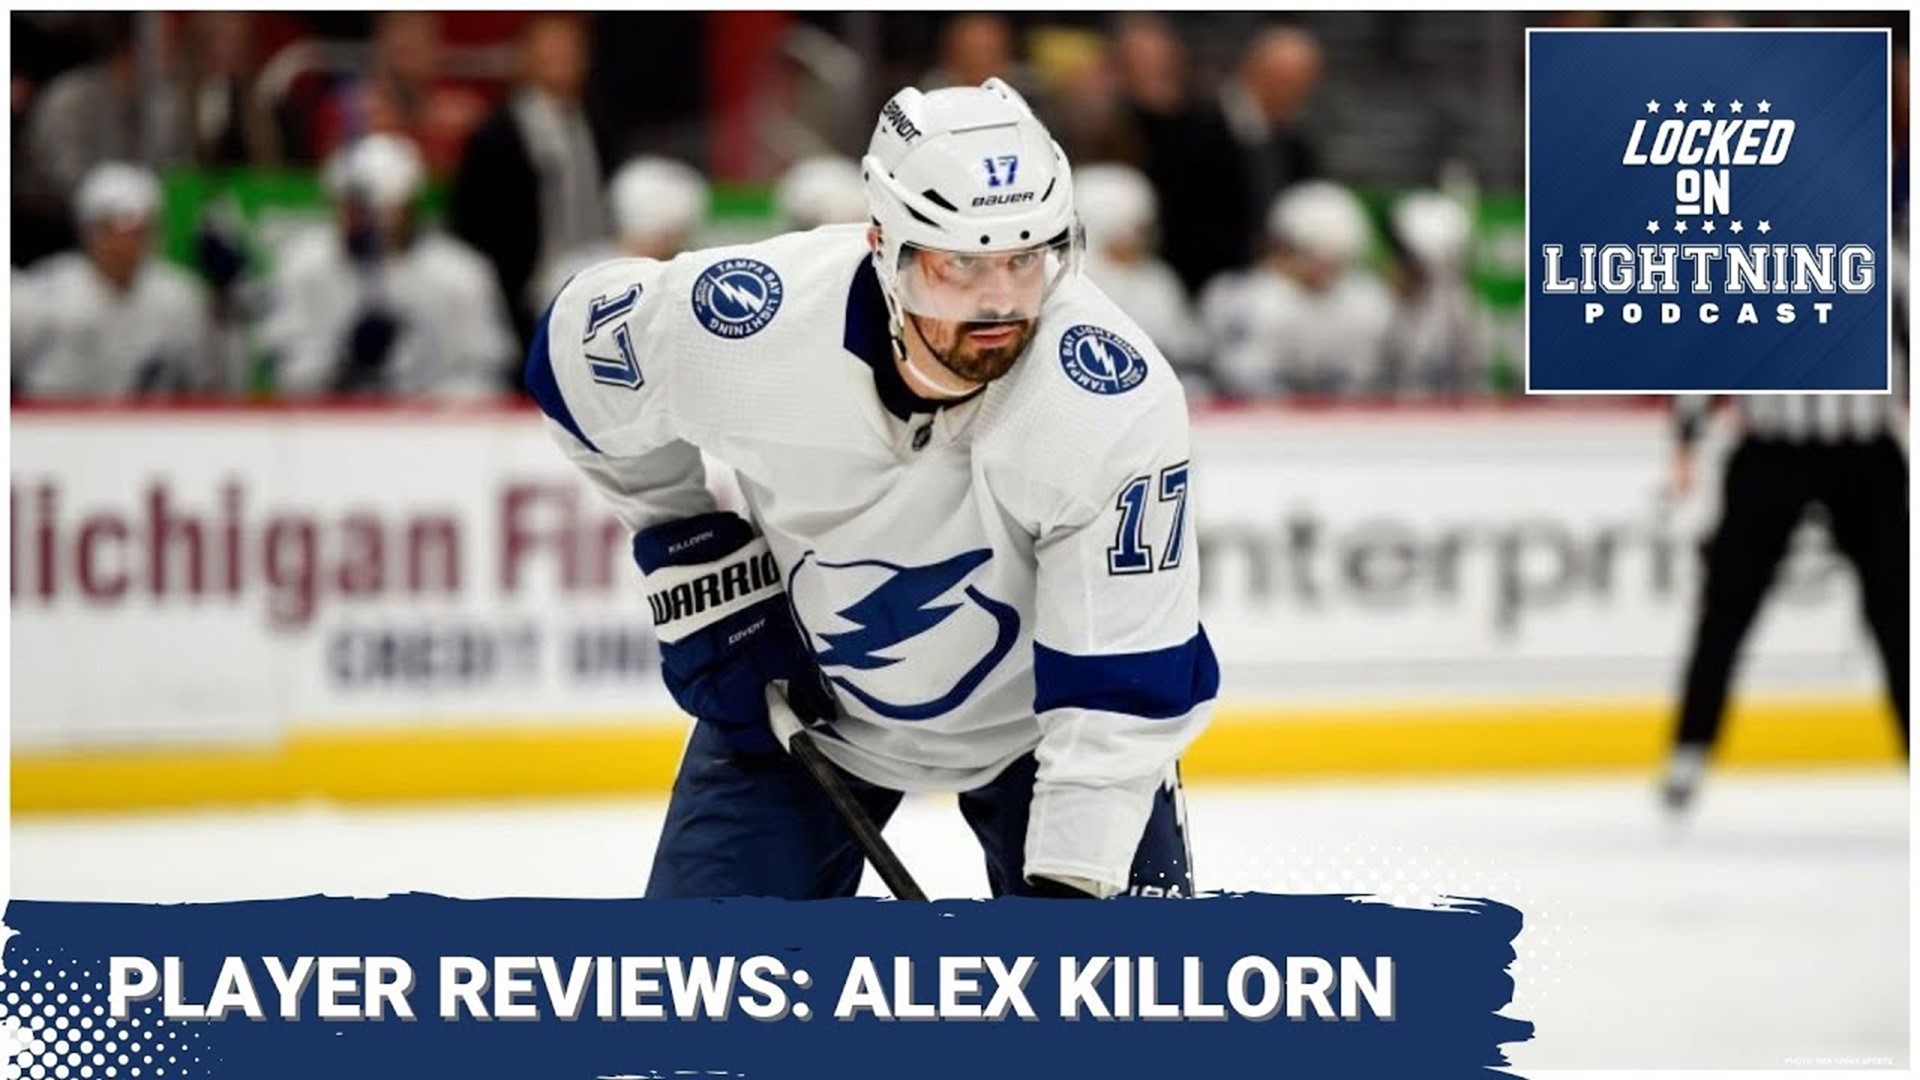 Alex Killorn had another impressive season in 2022. He reached a career-high in goals scored and points. This as he hits the Free Agency market this summer.